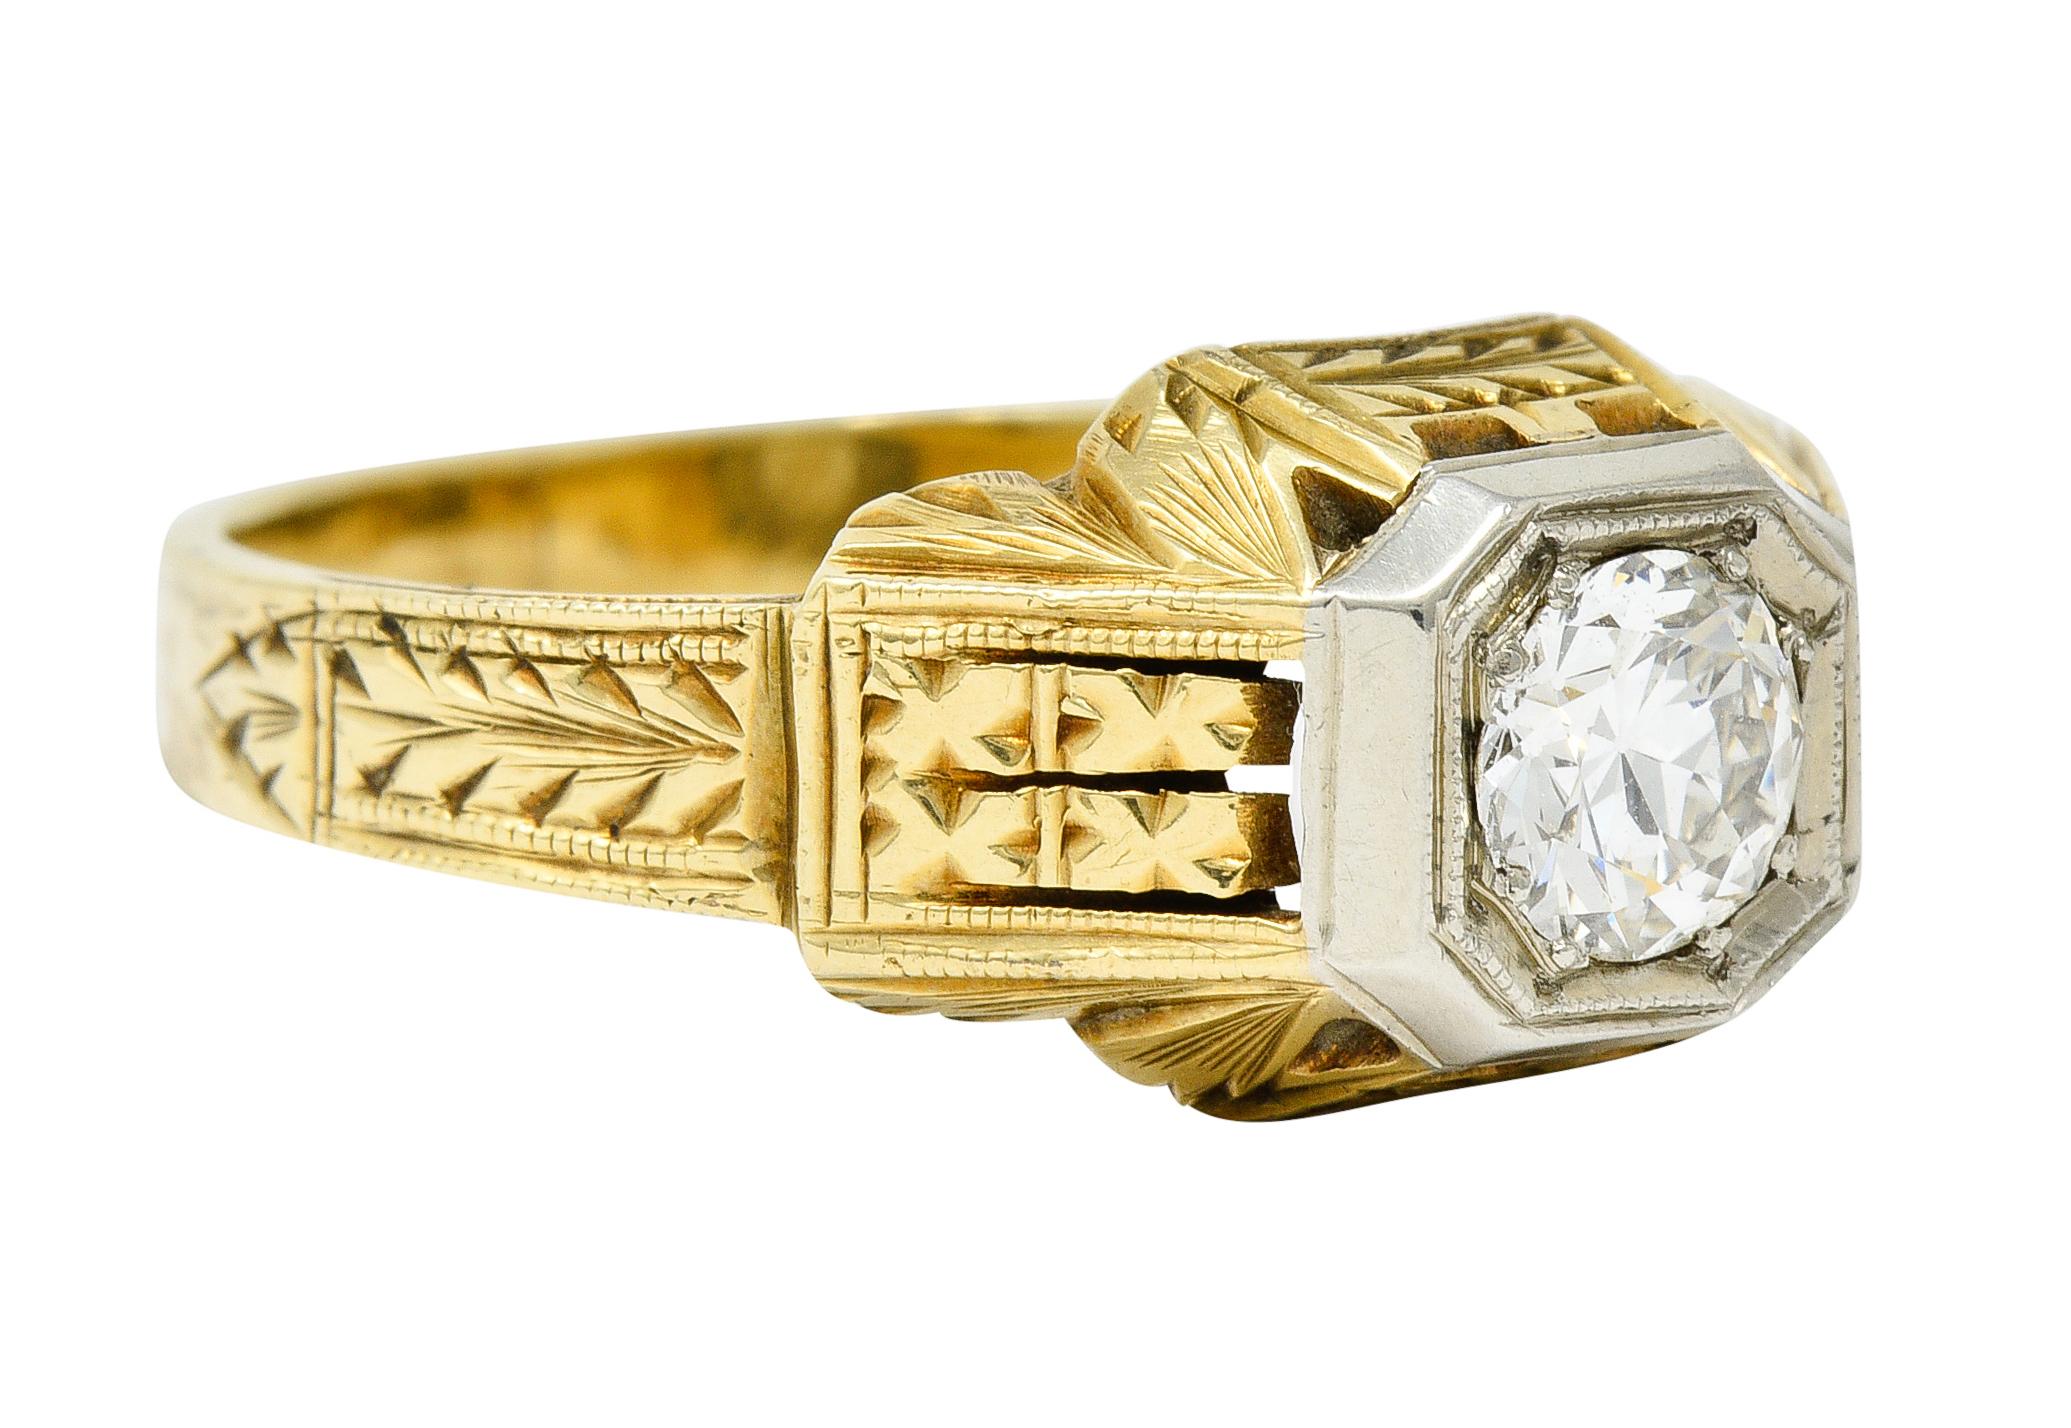 Centering a transitional cut diamond weighing approximately 0.58 carat; J/K color with VS1 clarity

Set low in a white gold square form head accented by milgrain

Yellow gold mounting is deeply engraved throughout with stylized florals and